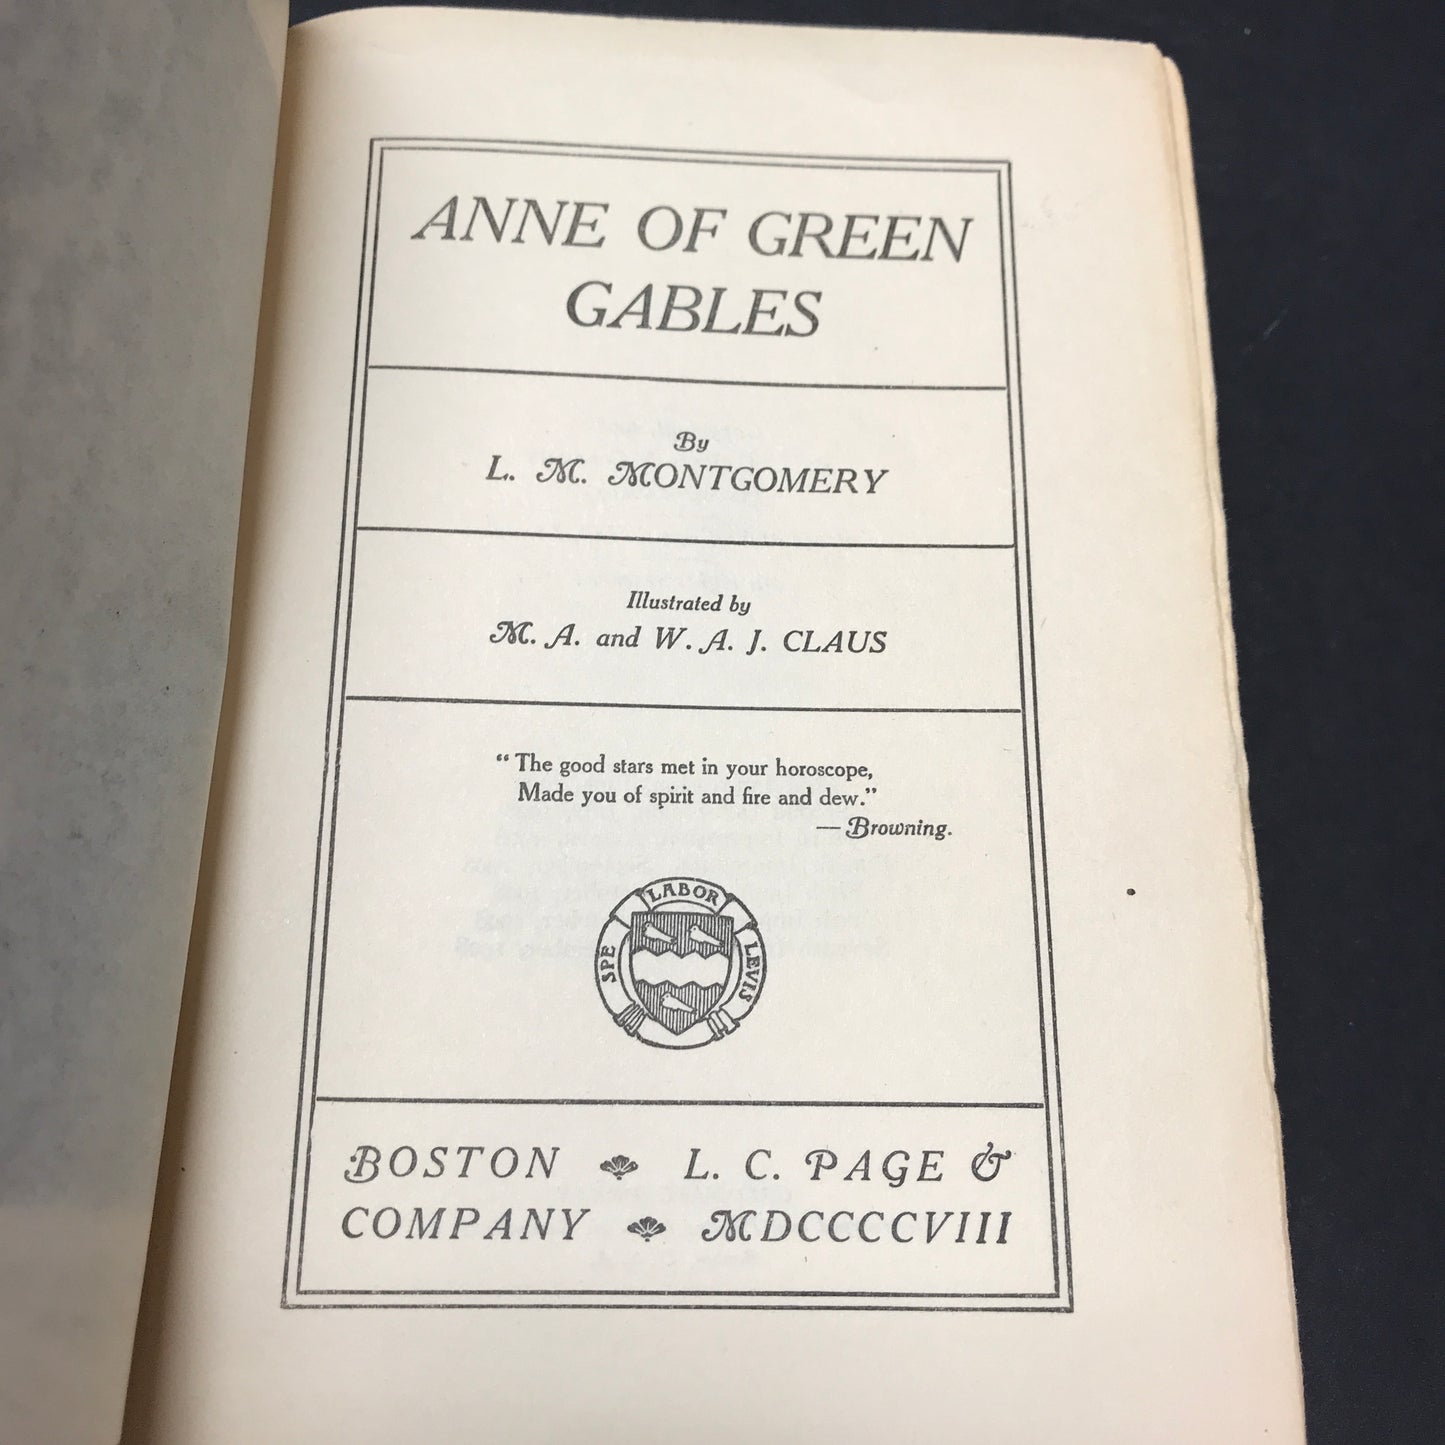 Anne of Green Gables - L. M. Montgomery - 1908 - Seventh Print - Re-glued Spine